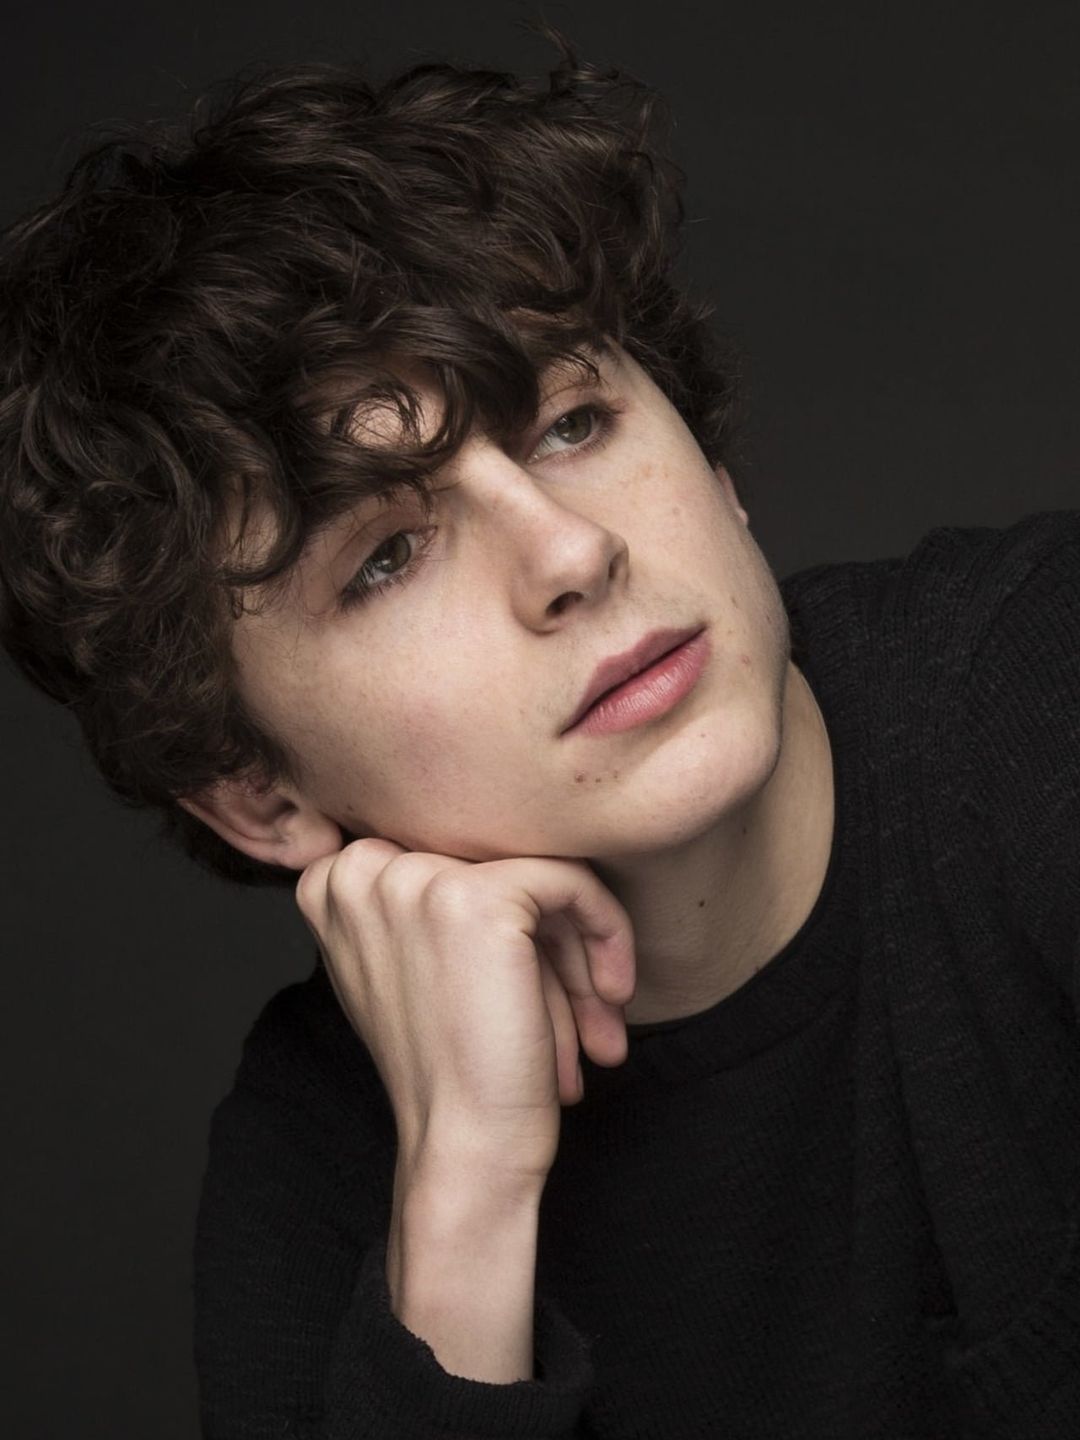 Timothee Chalamet who is his mother